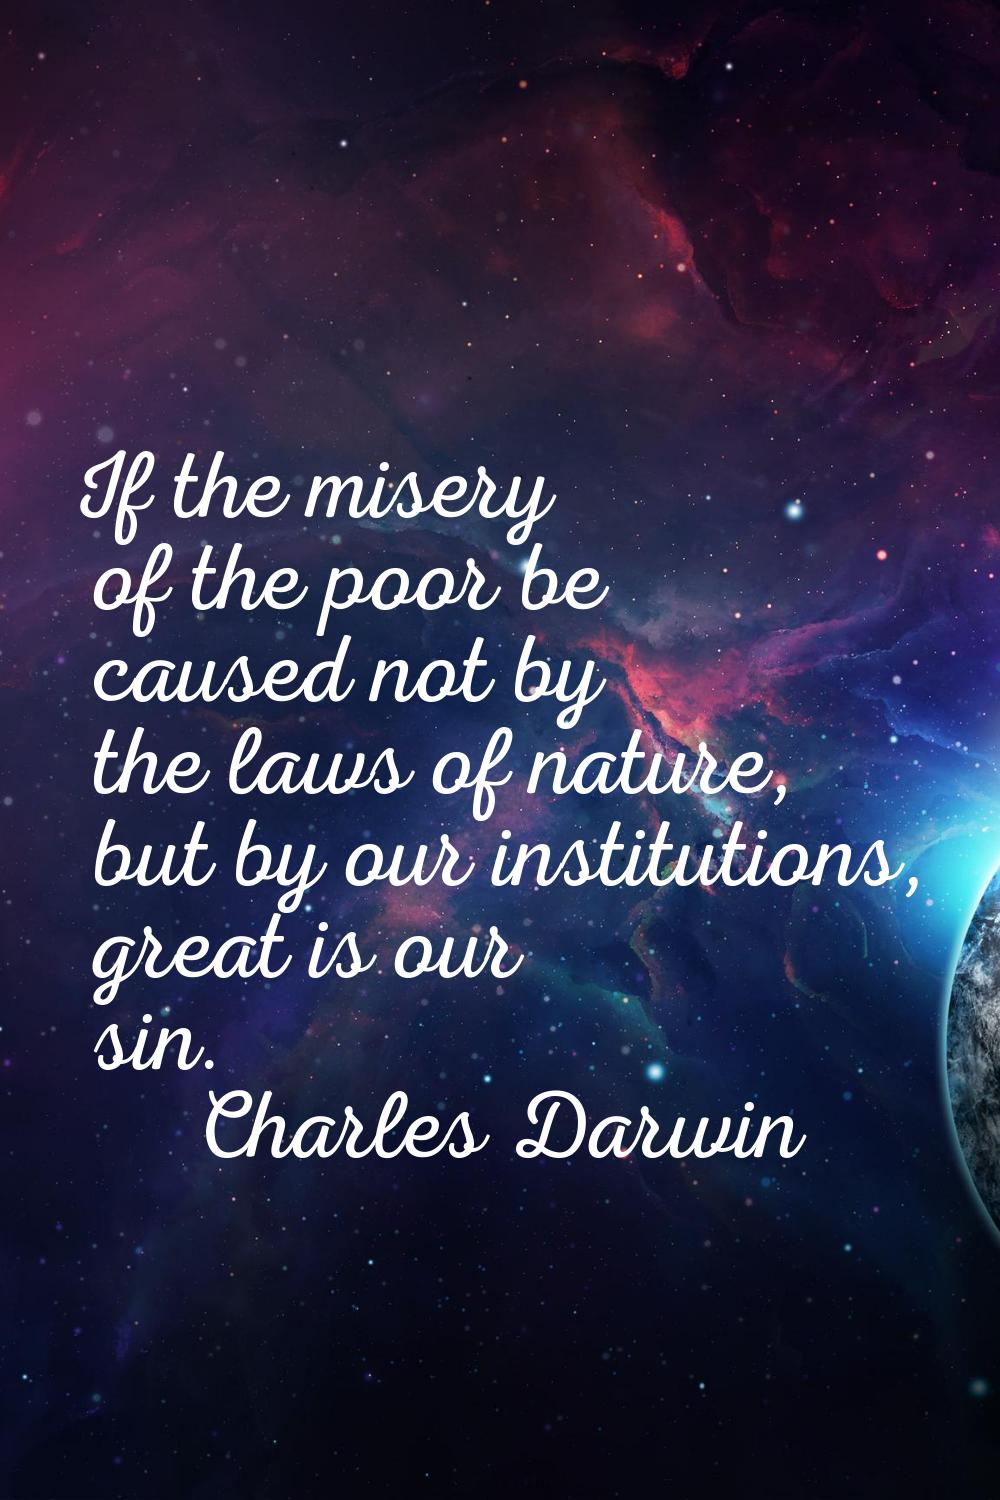 If the misery of the poor be caused not by the laws of nature, but by our institutions, great is ou